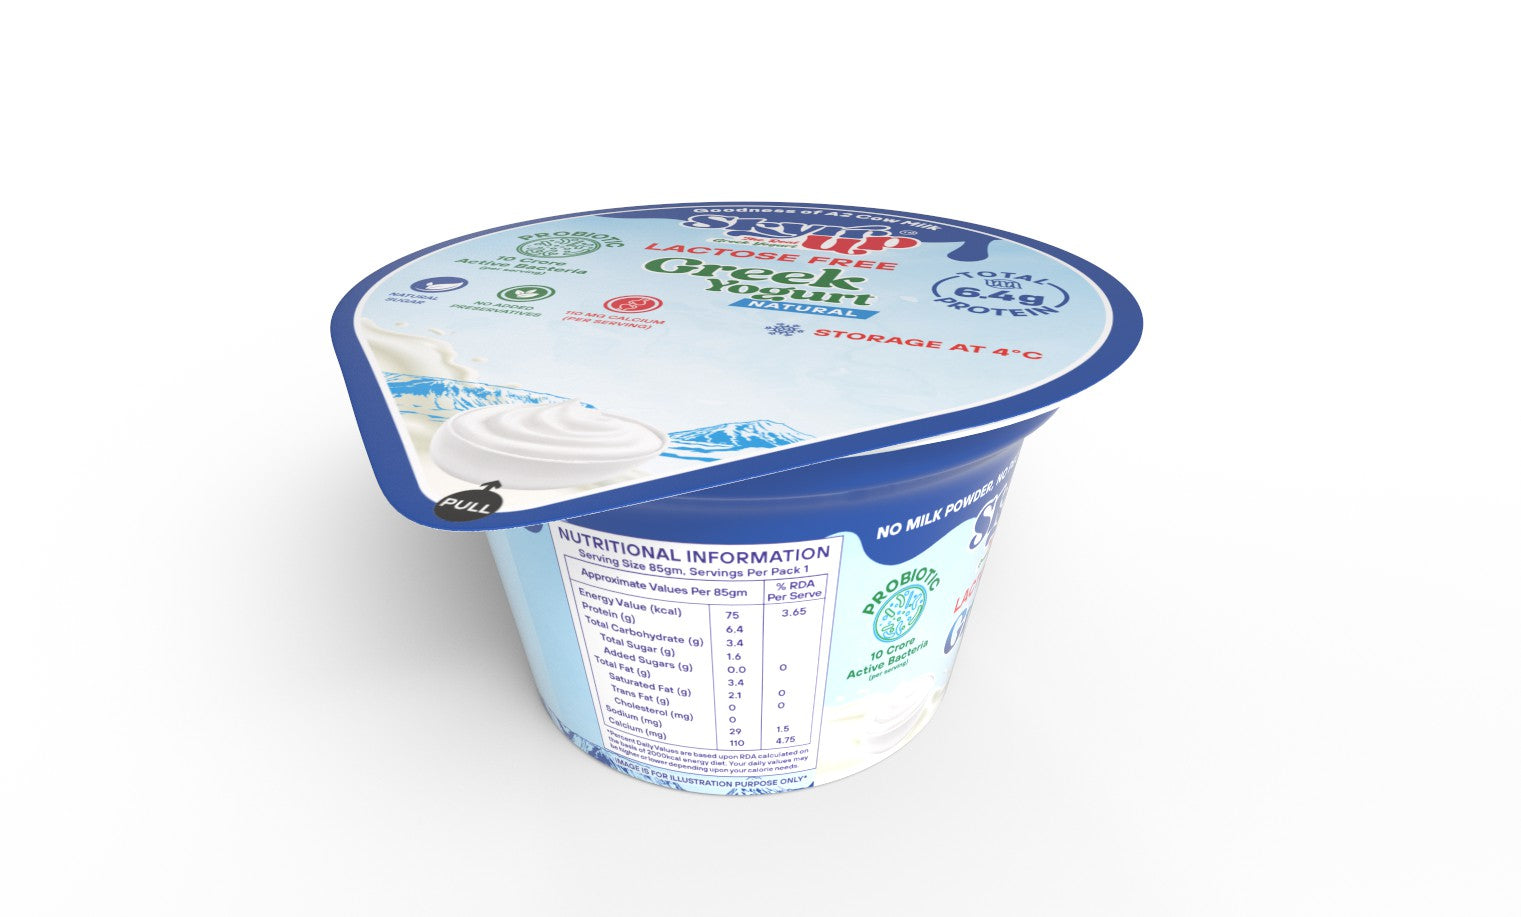 Greek Yogurt - 85gm - Natural (Made From A2 Cow Milk) - Probiotic, 6.4gm Protein, Zero Preservatives, Lactose Free